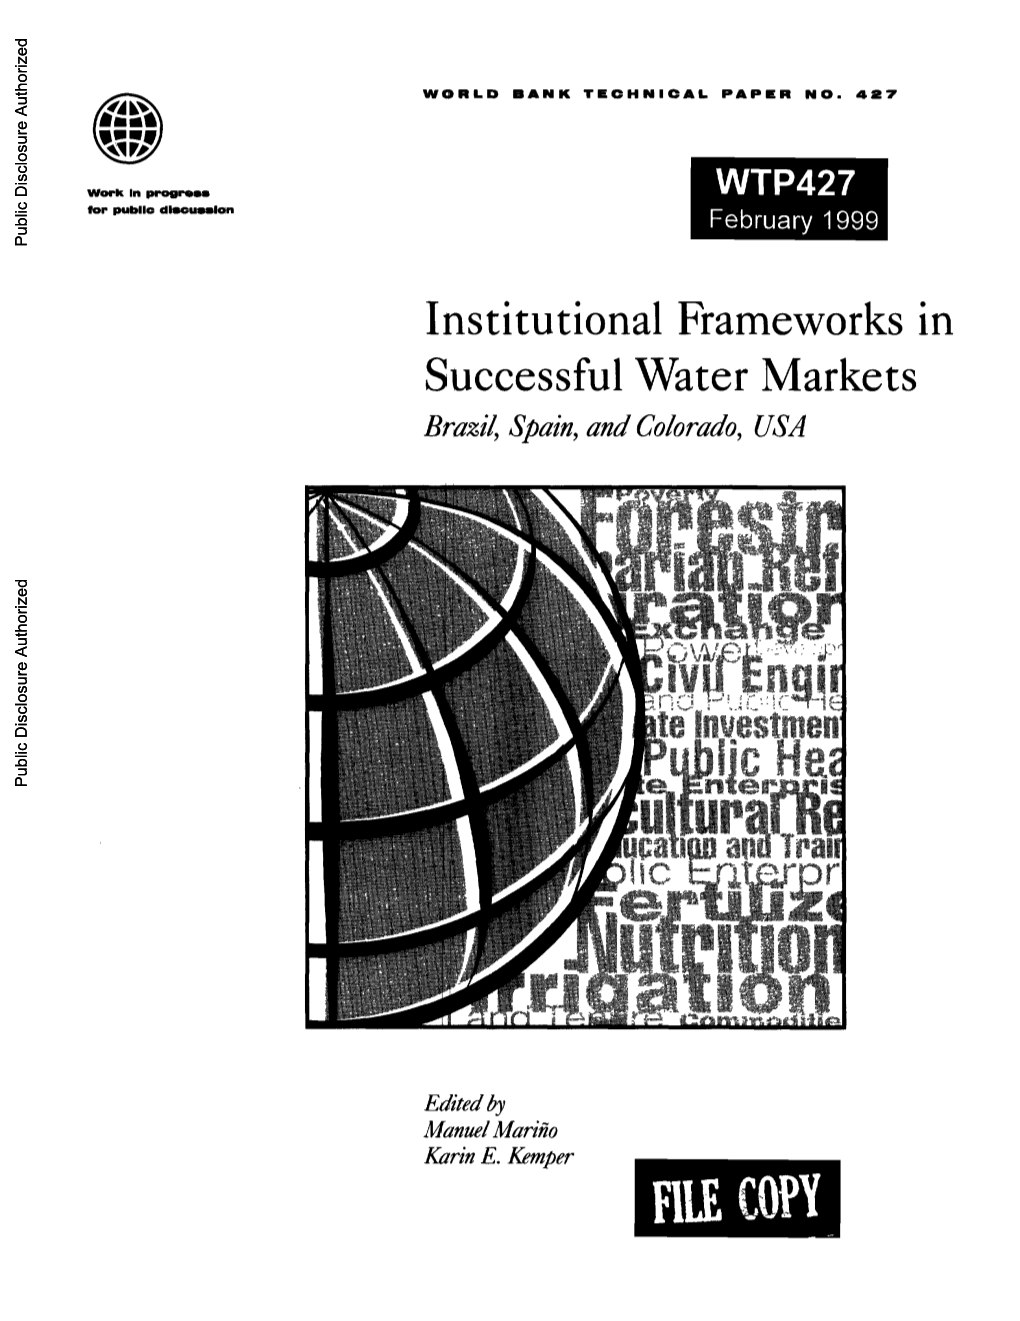 Institutional Frameworks in Successful Water Markets Brazil, Spain,And Colorado,USA Public Disclosure Authorized